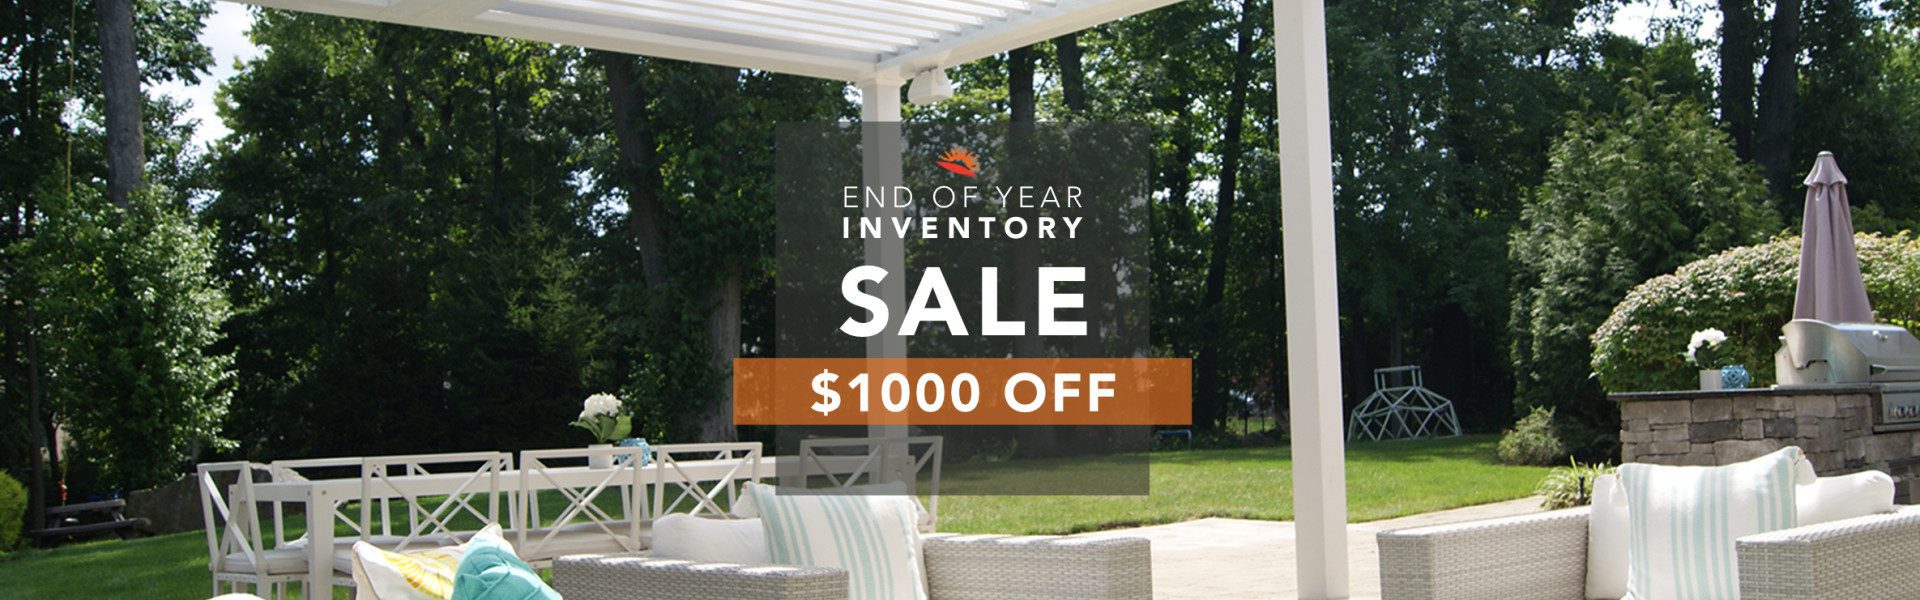 Equinox Louvered Roof end of year inventory sale